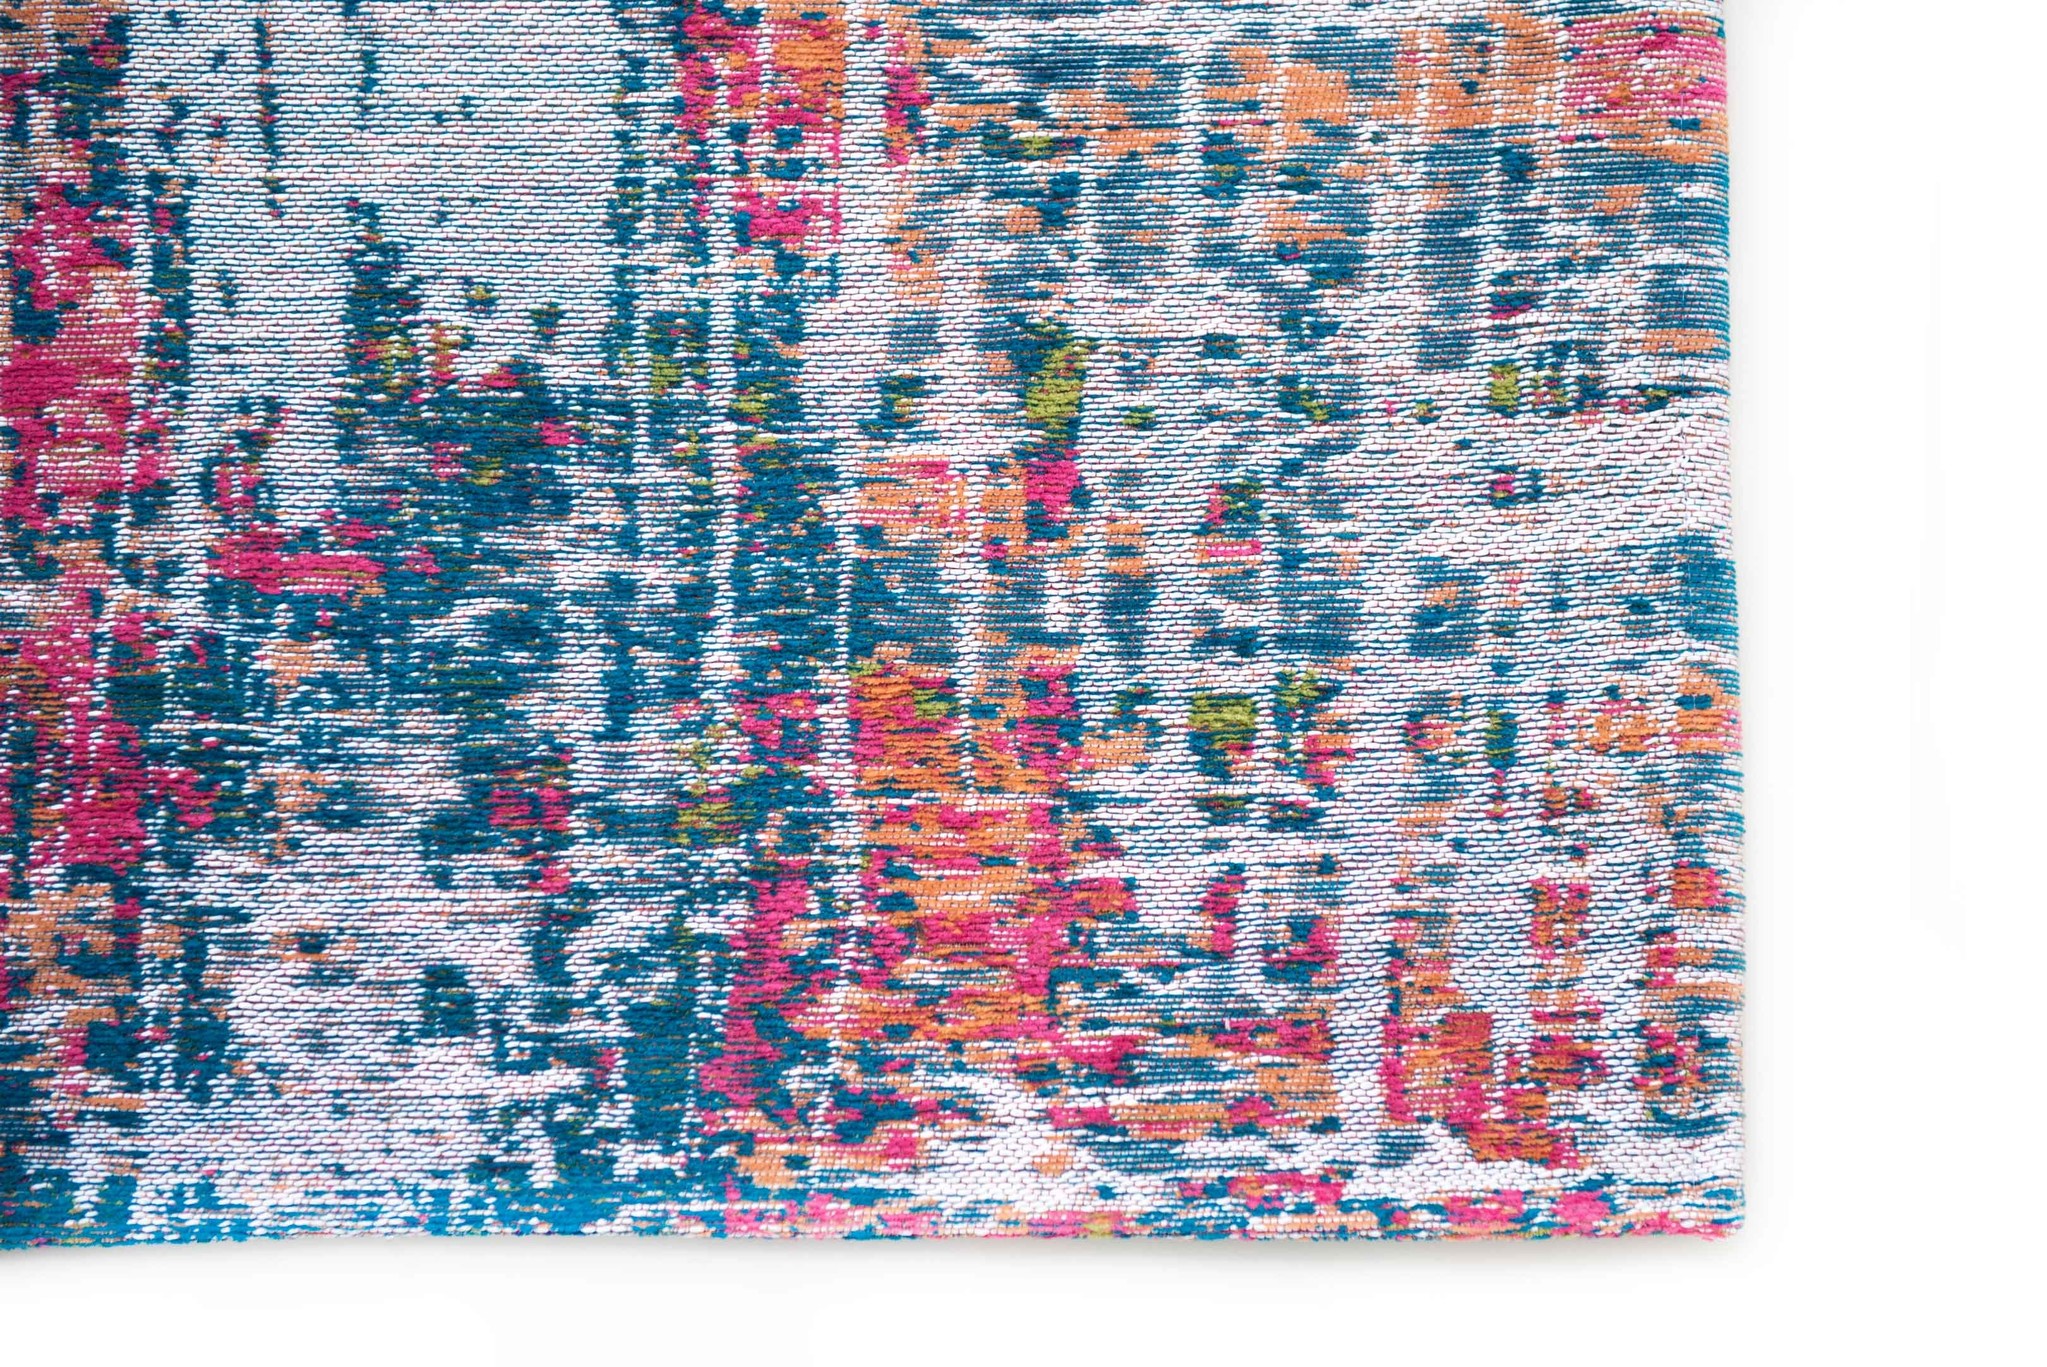 Abstract Multi Flatwoven Rug ☞ Size: 9' 2" x 12' (280 x 360 cm)